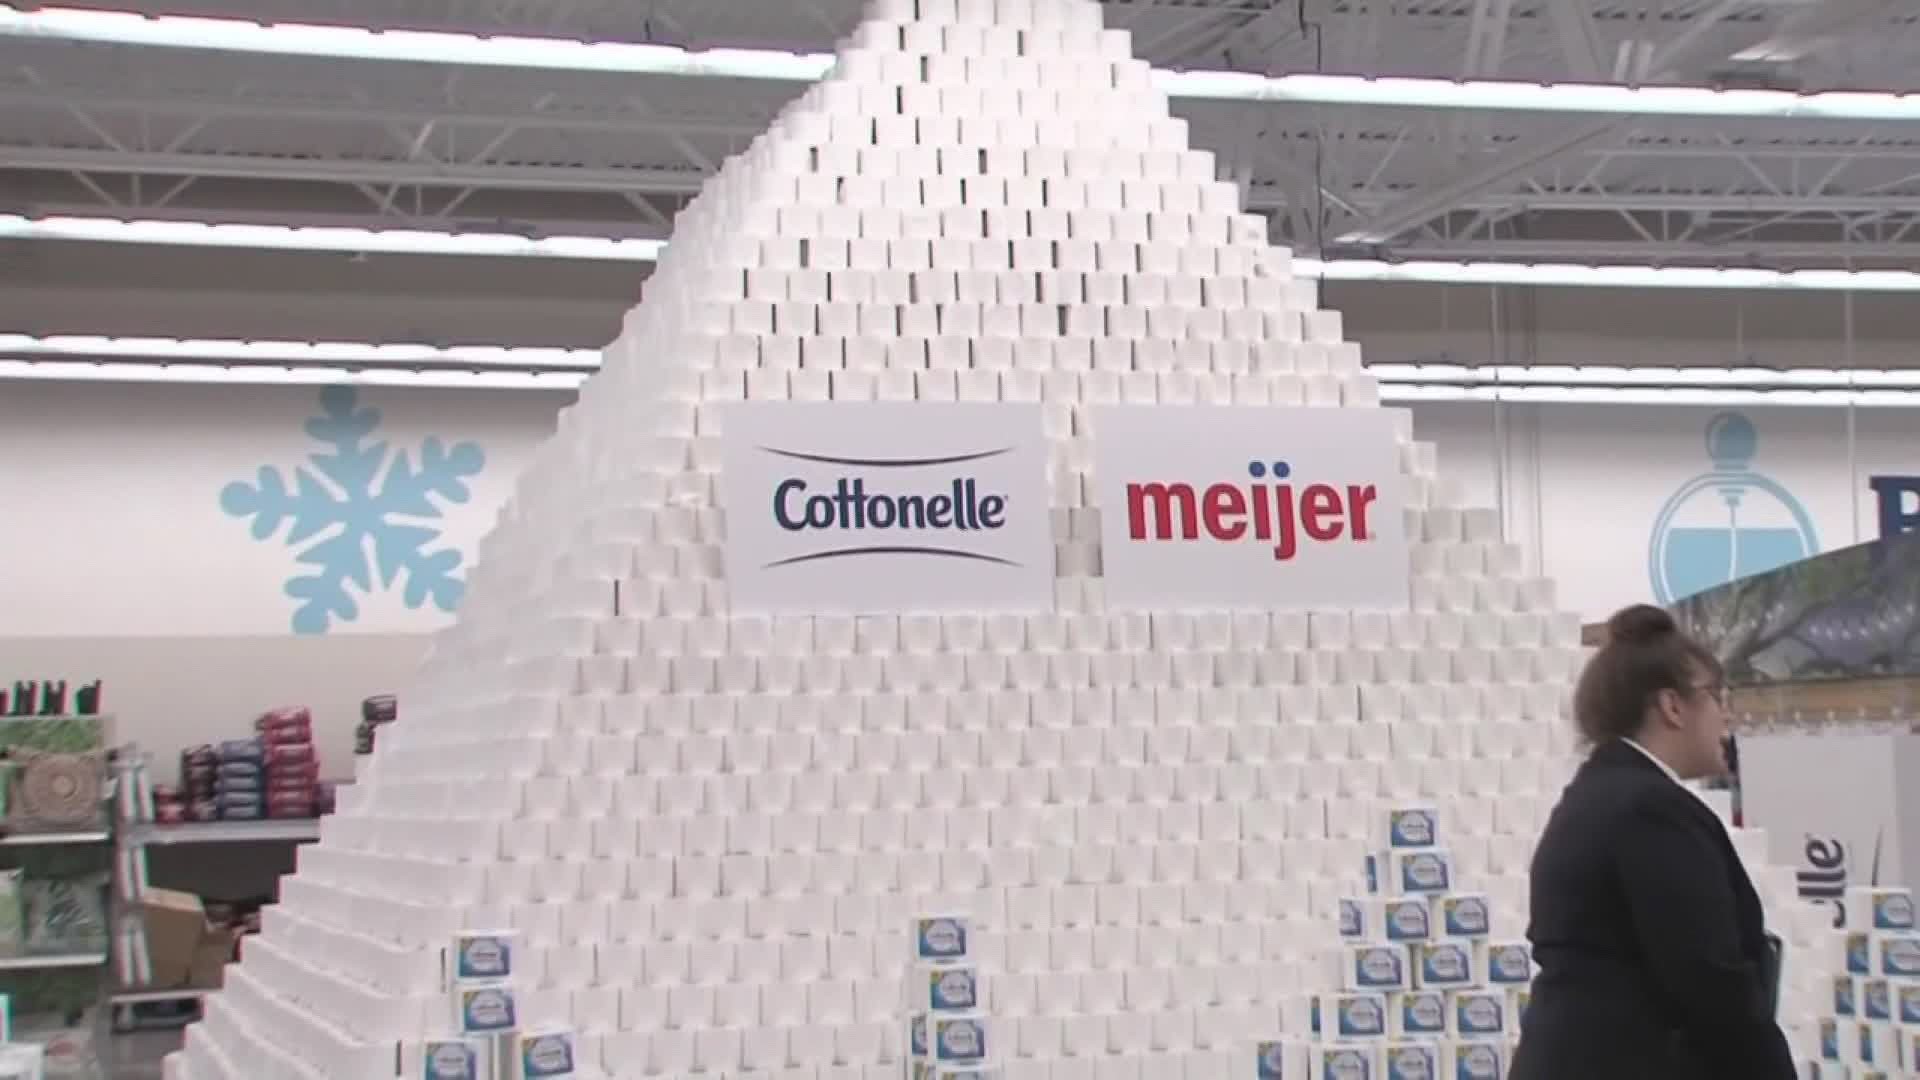 A West Michigan nonprofit is getting a donation of thousands of rolls of toilet Paper from Cottonelle.